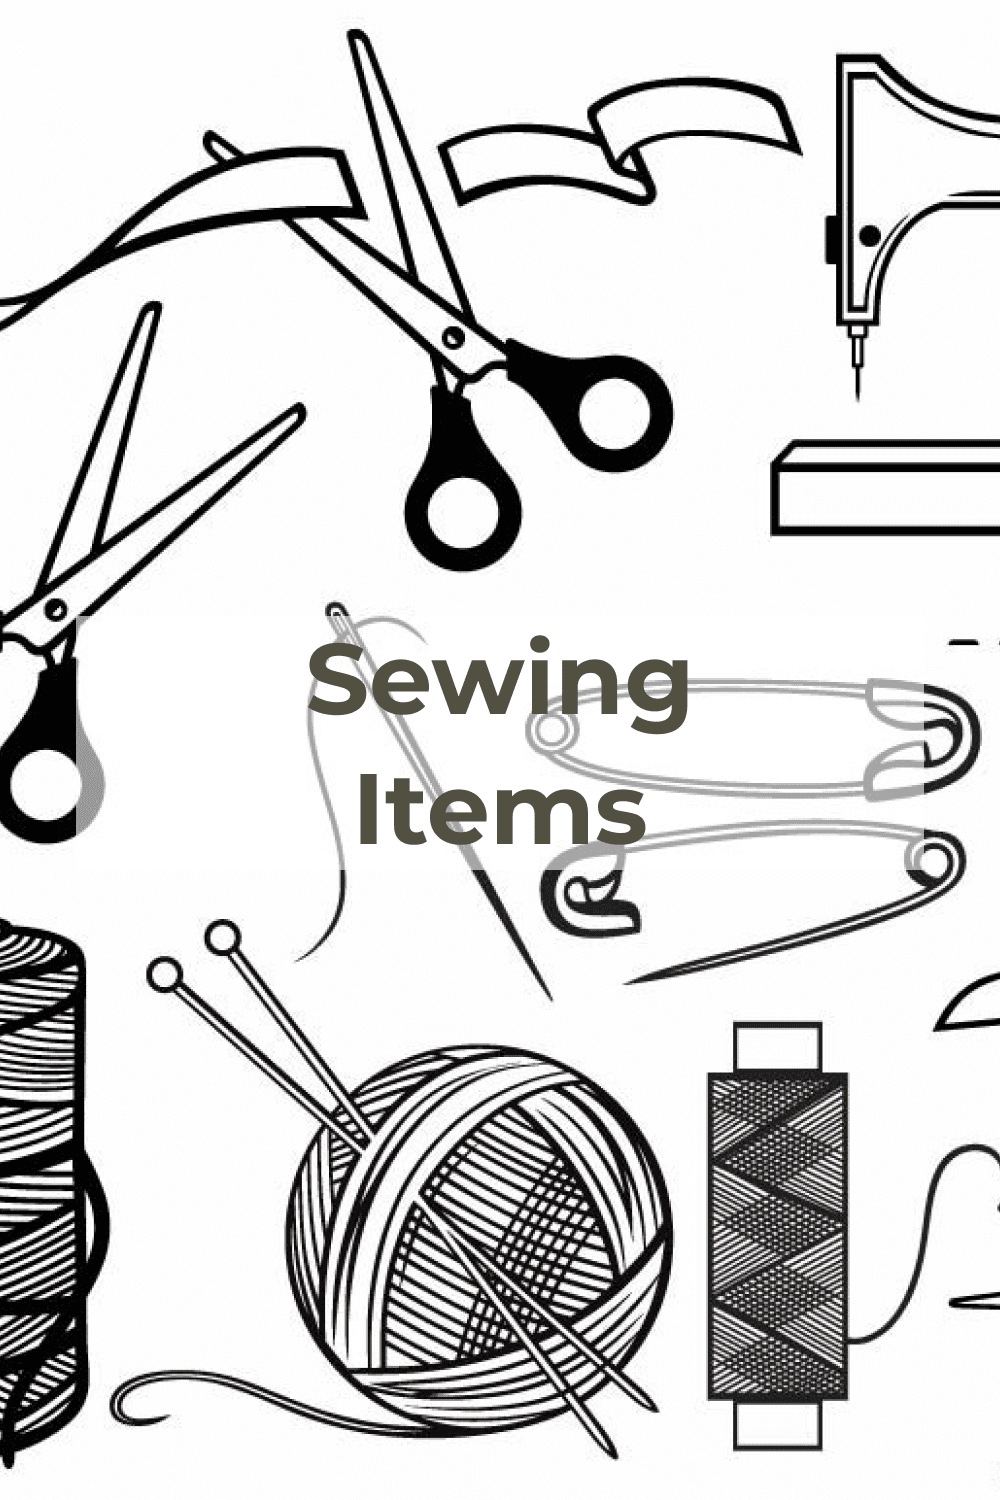 Sewing Items Pinterest.